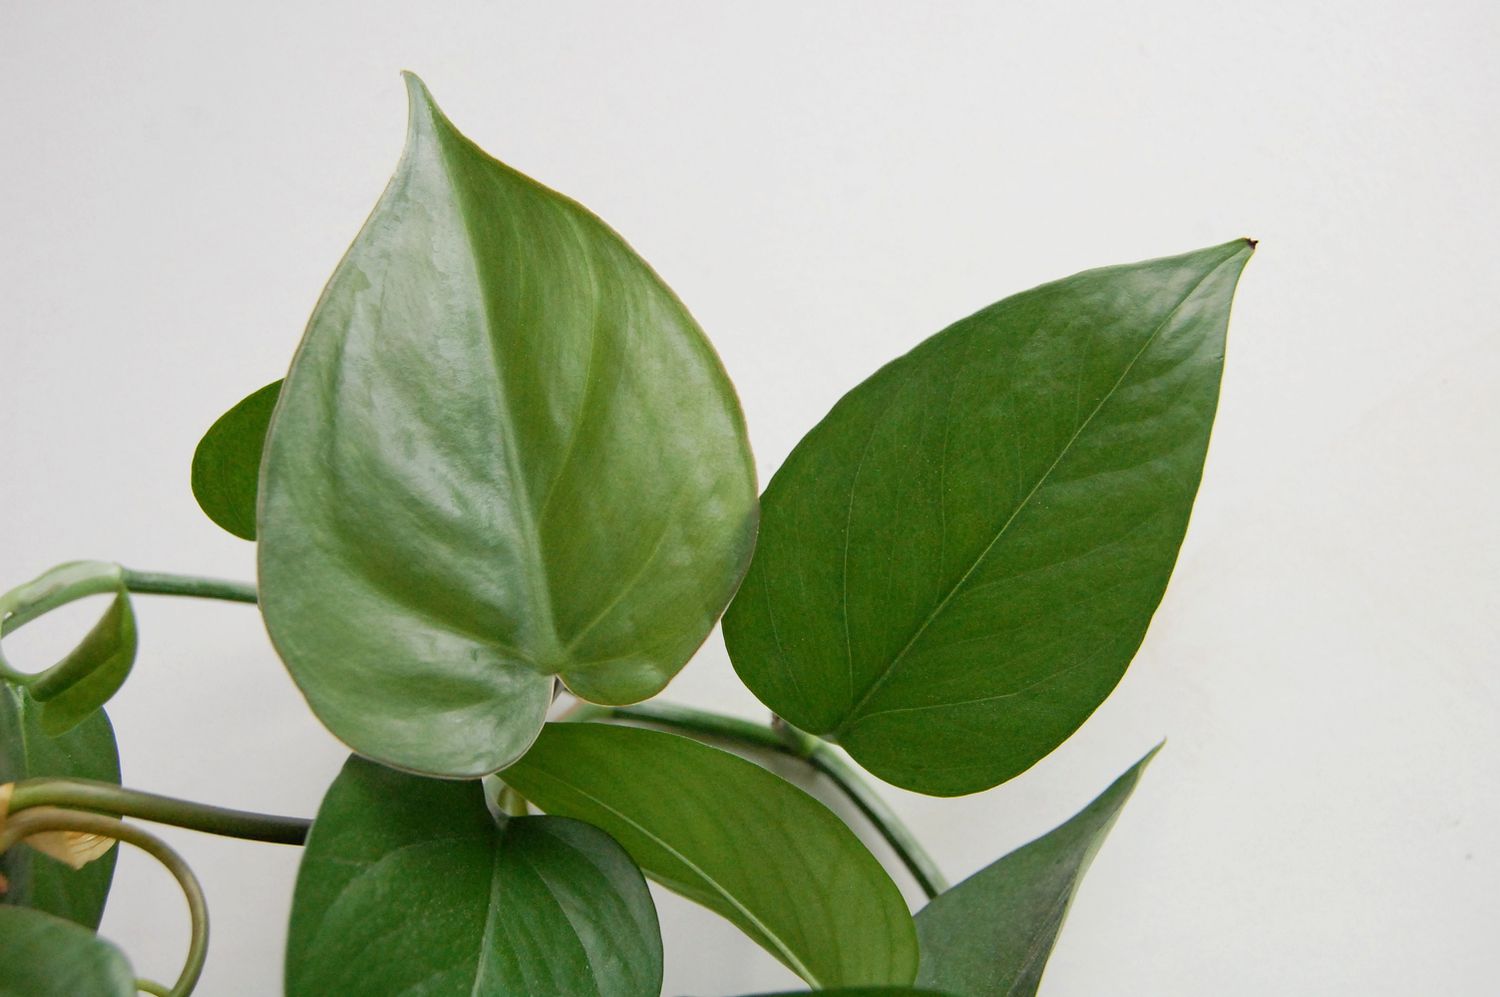 A side by side comparison of a philodendron leaf and a pothos leaf.